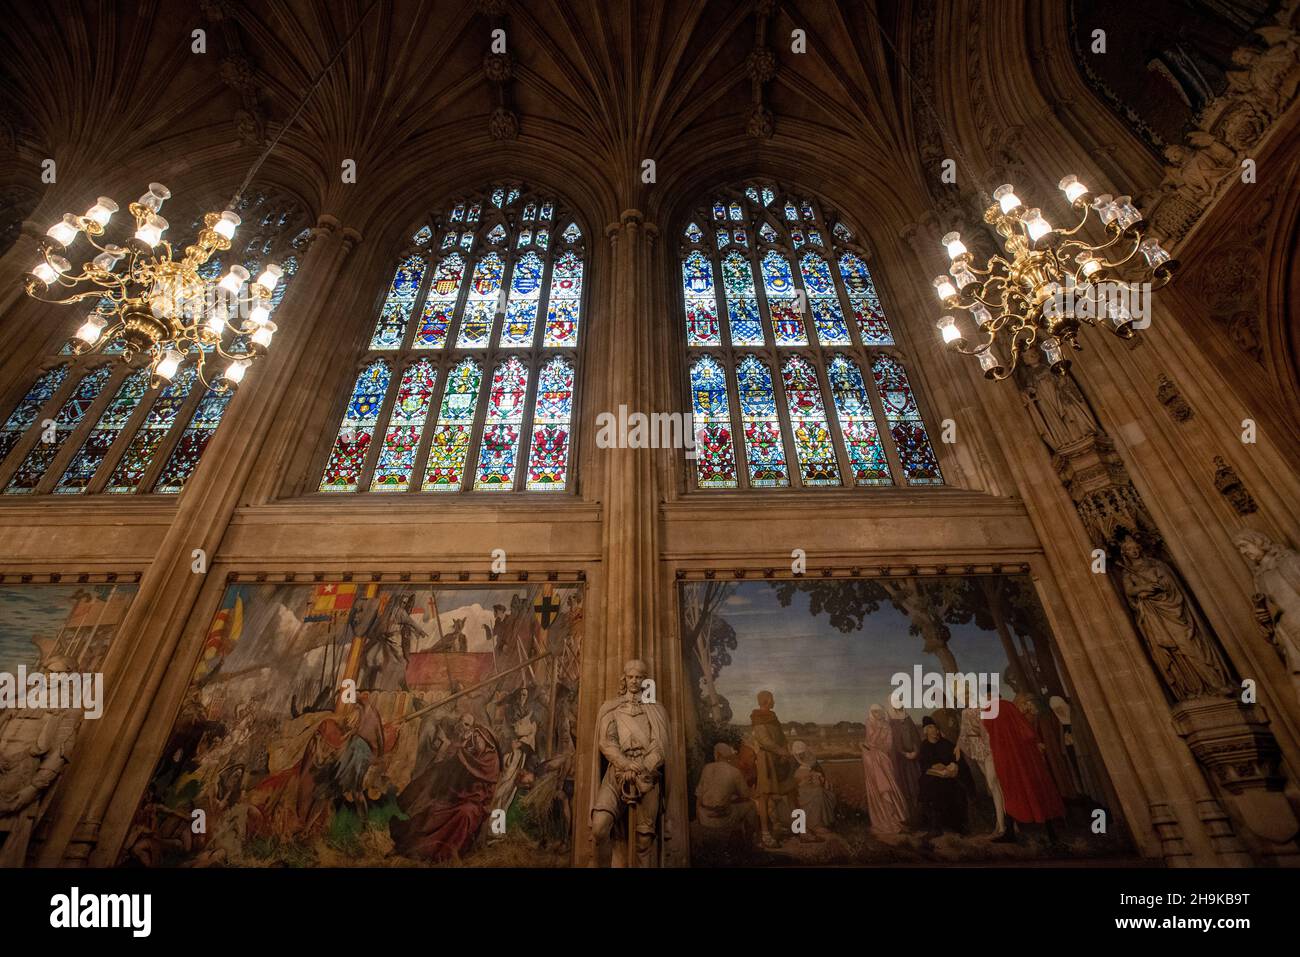 London, September 2021. The Palace of Westminster (also known as the Houses of Parliament) is the London building where the two Houses of Parliament a Stock Photo